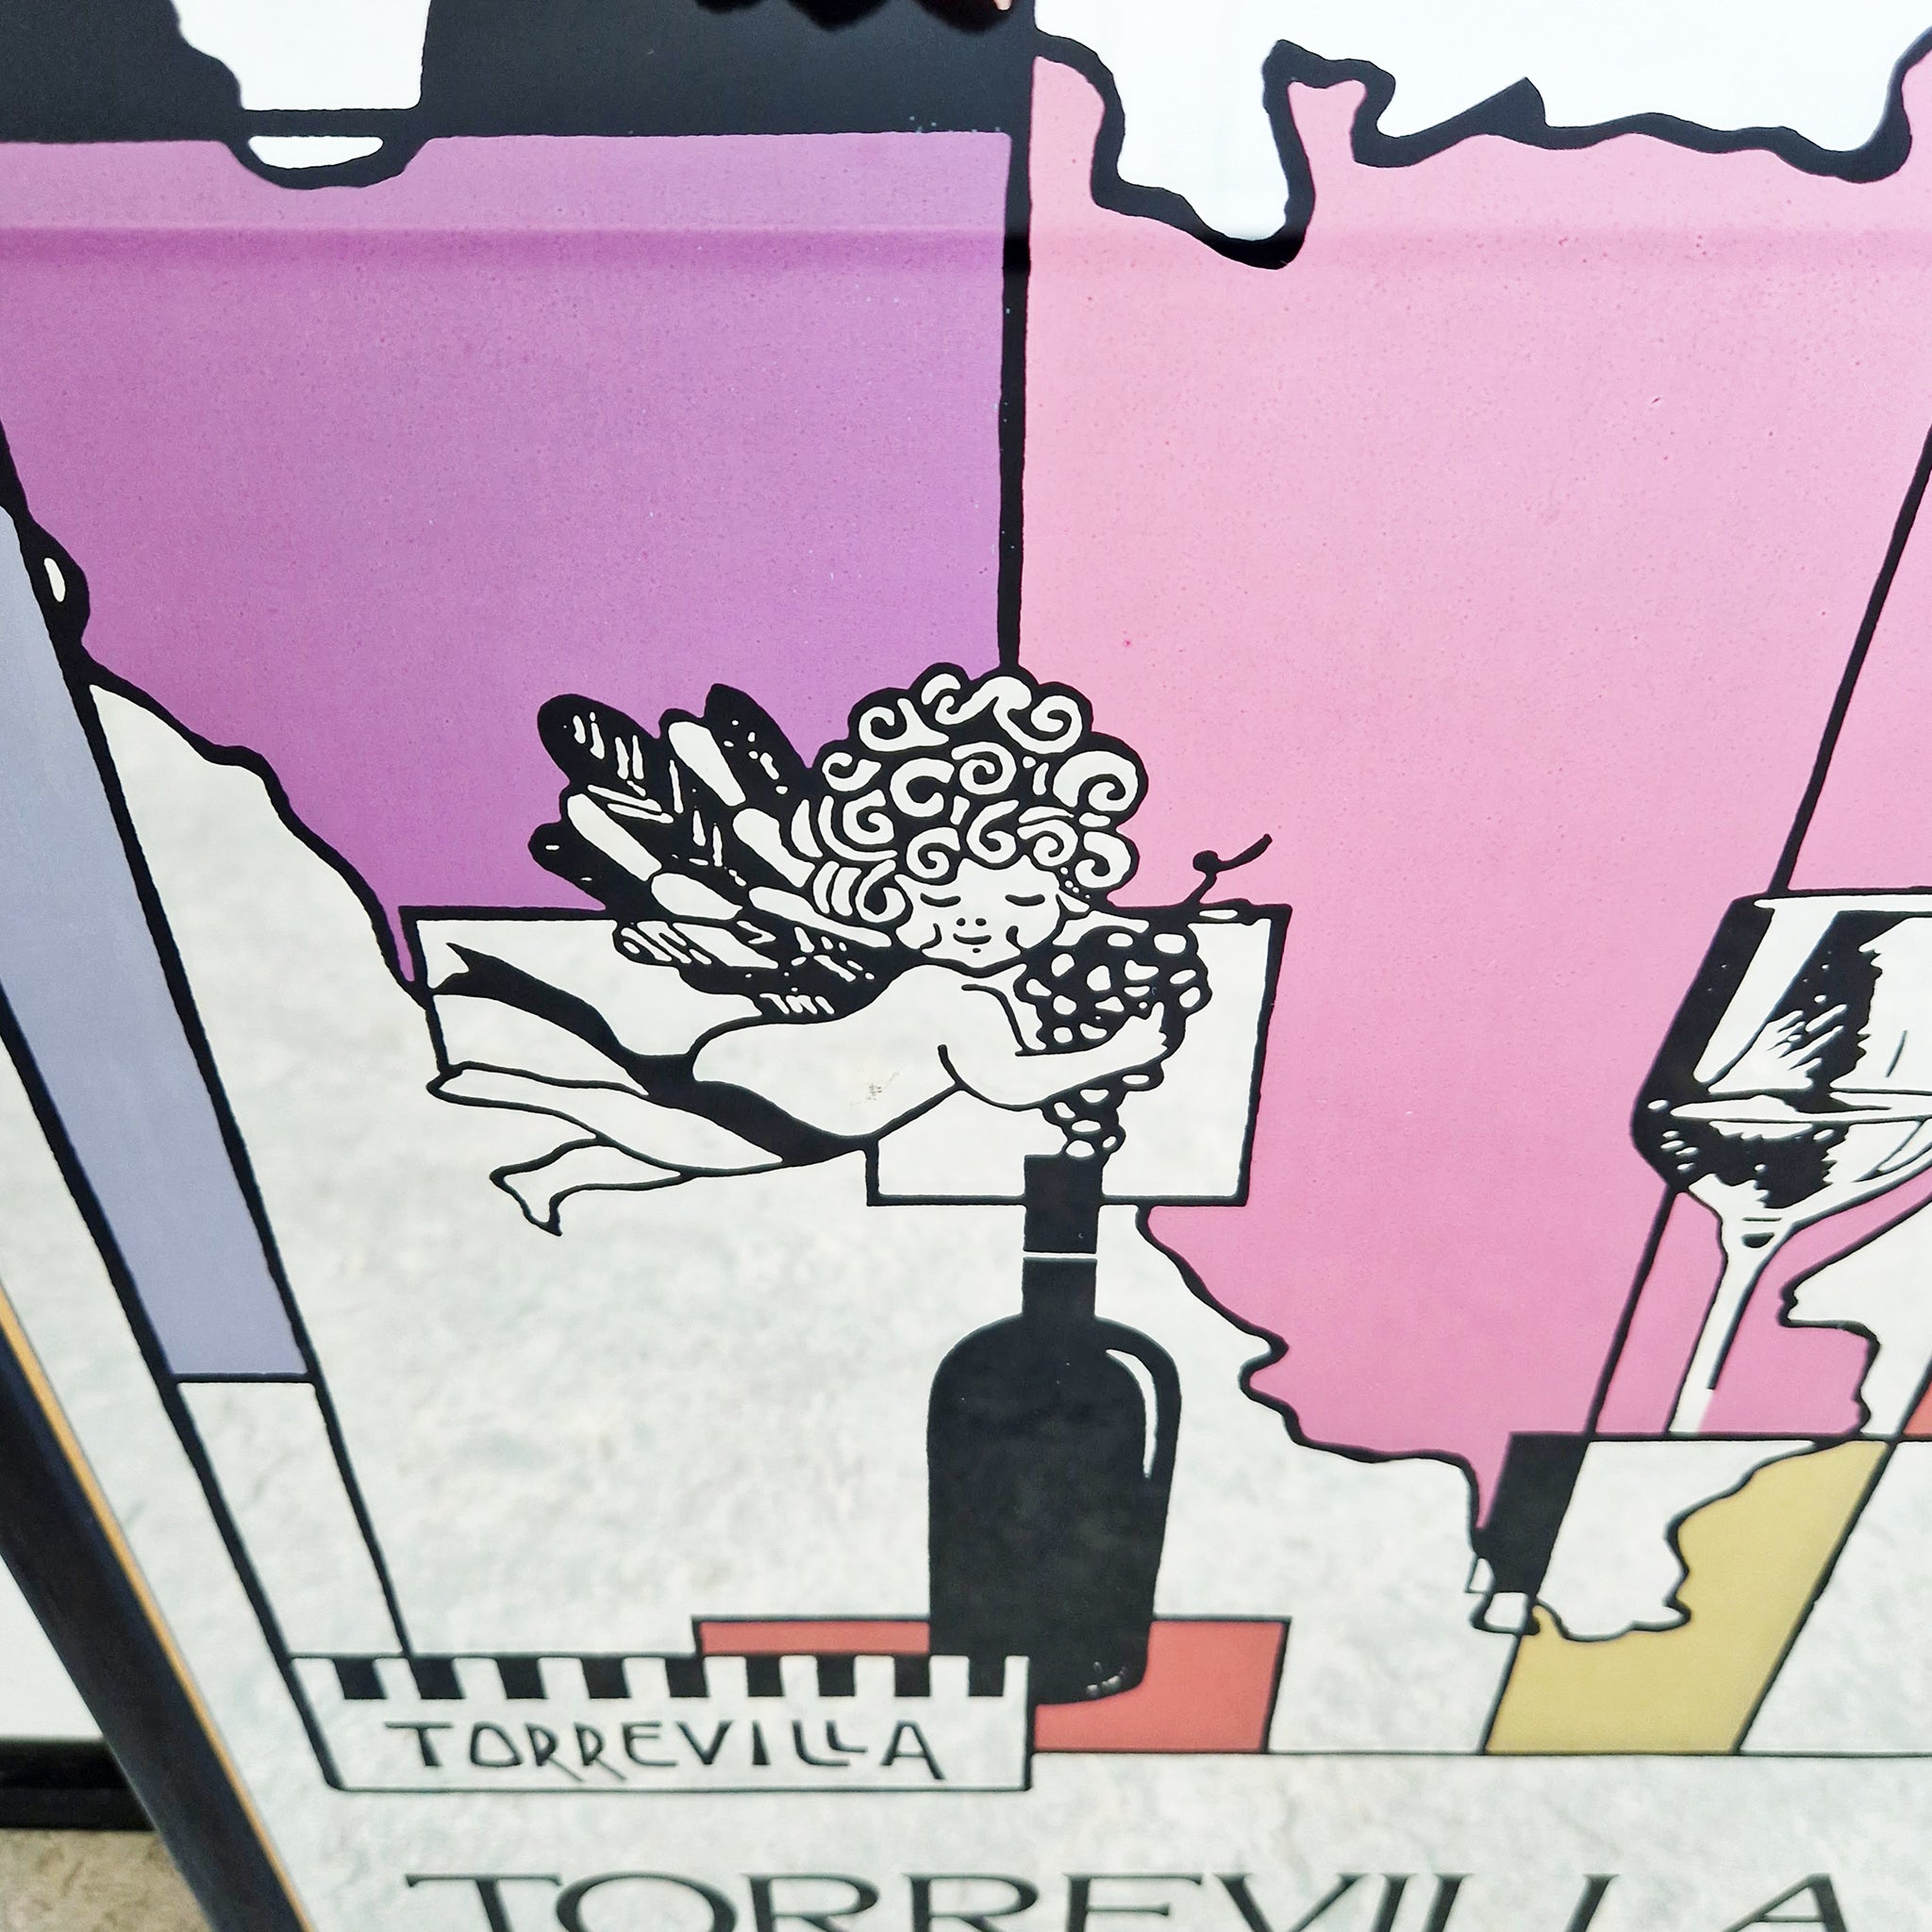 1980s advertising mirror for Torrevilla winery